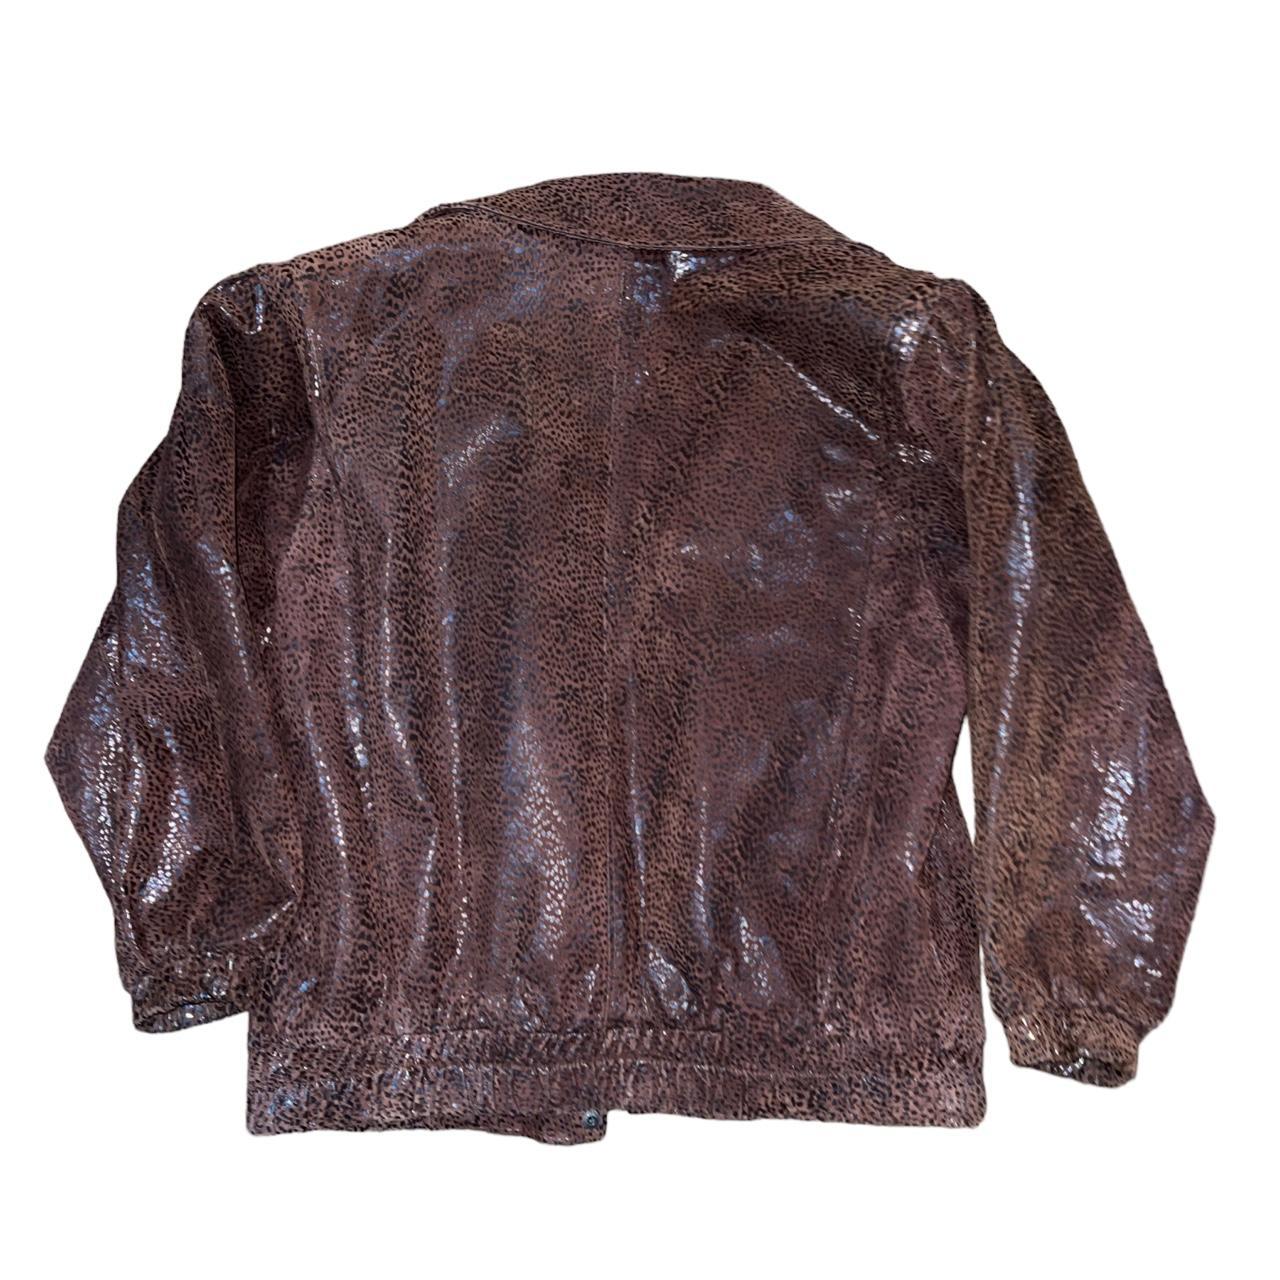 Women's Brown and Black Jacket (2)